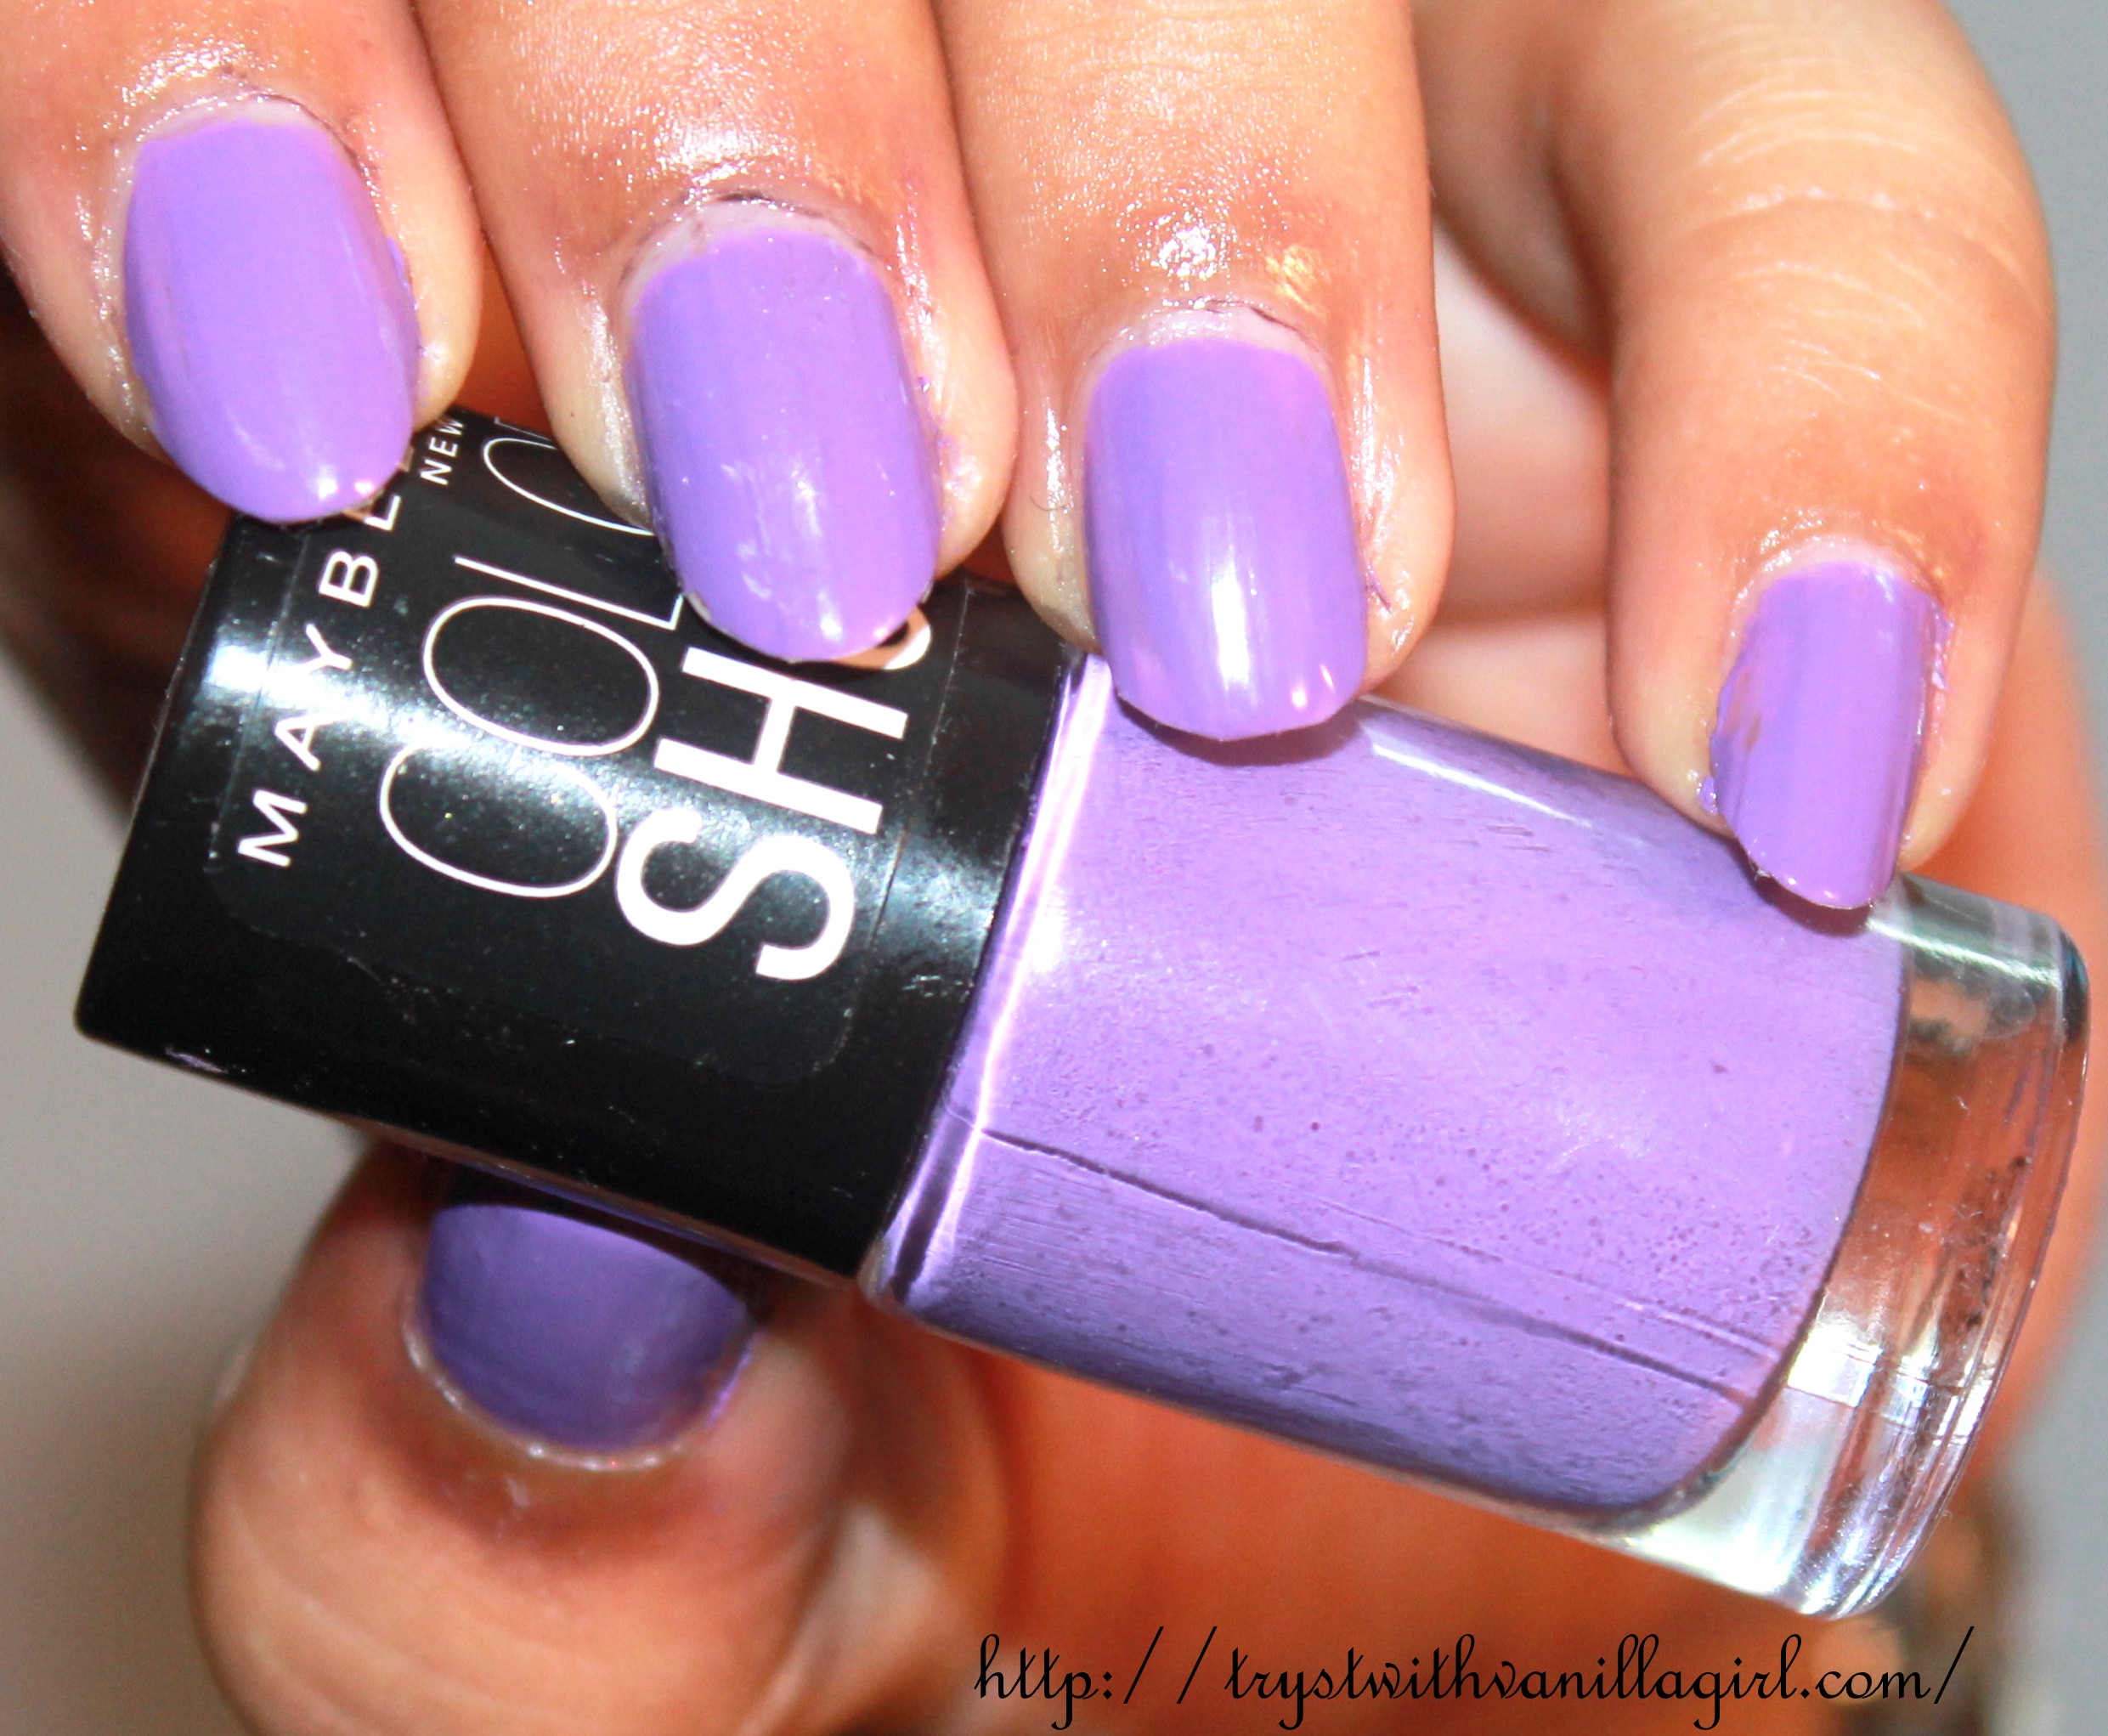 Maybelline Color Show Nail Polish Lavender Lies Review,Photos,NOTD